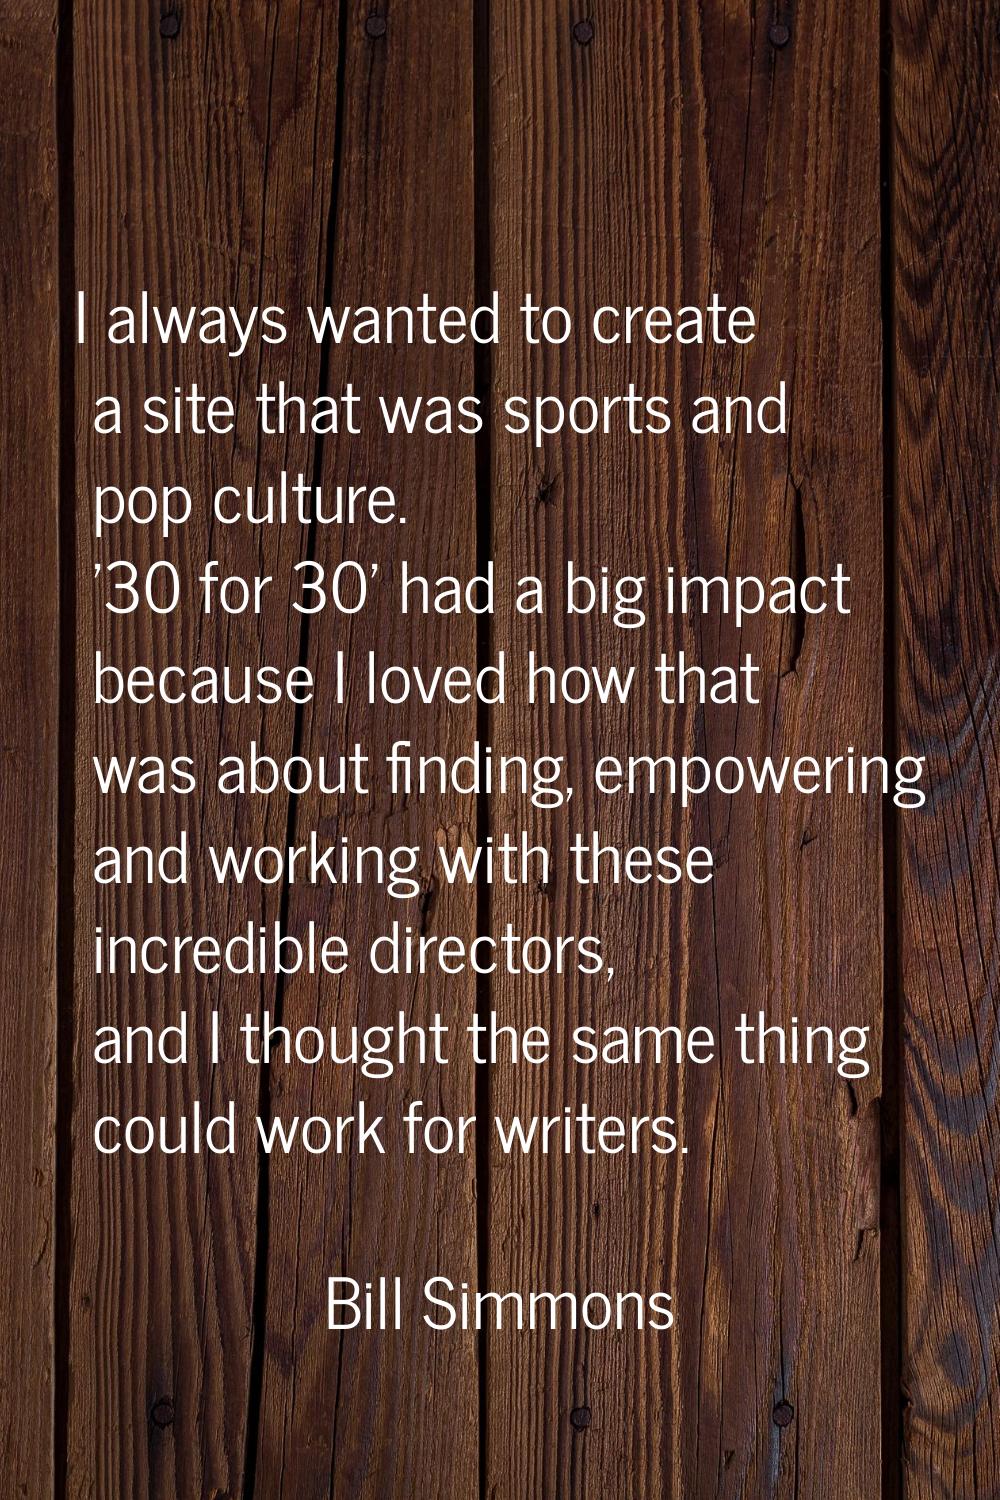 I always wanted to create a site that was sports and pop culture. '30 for 30' had a big impact beca